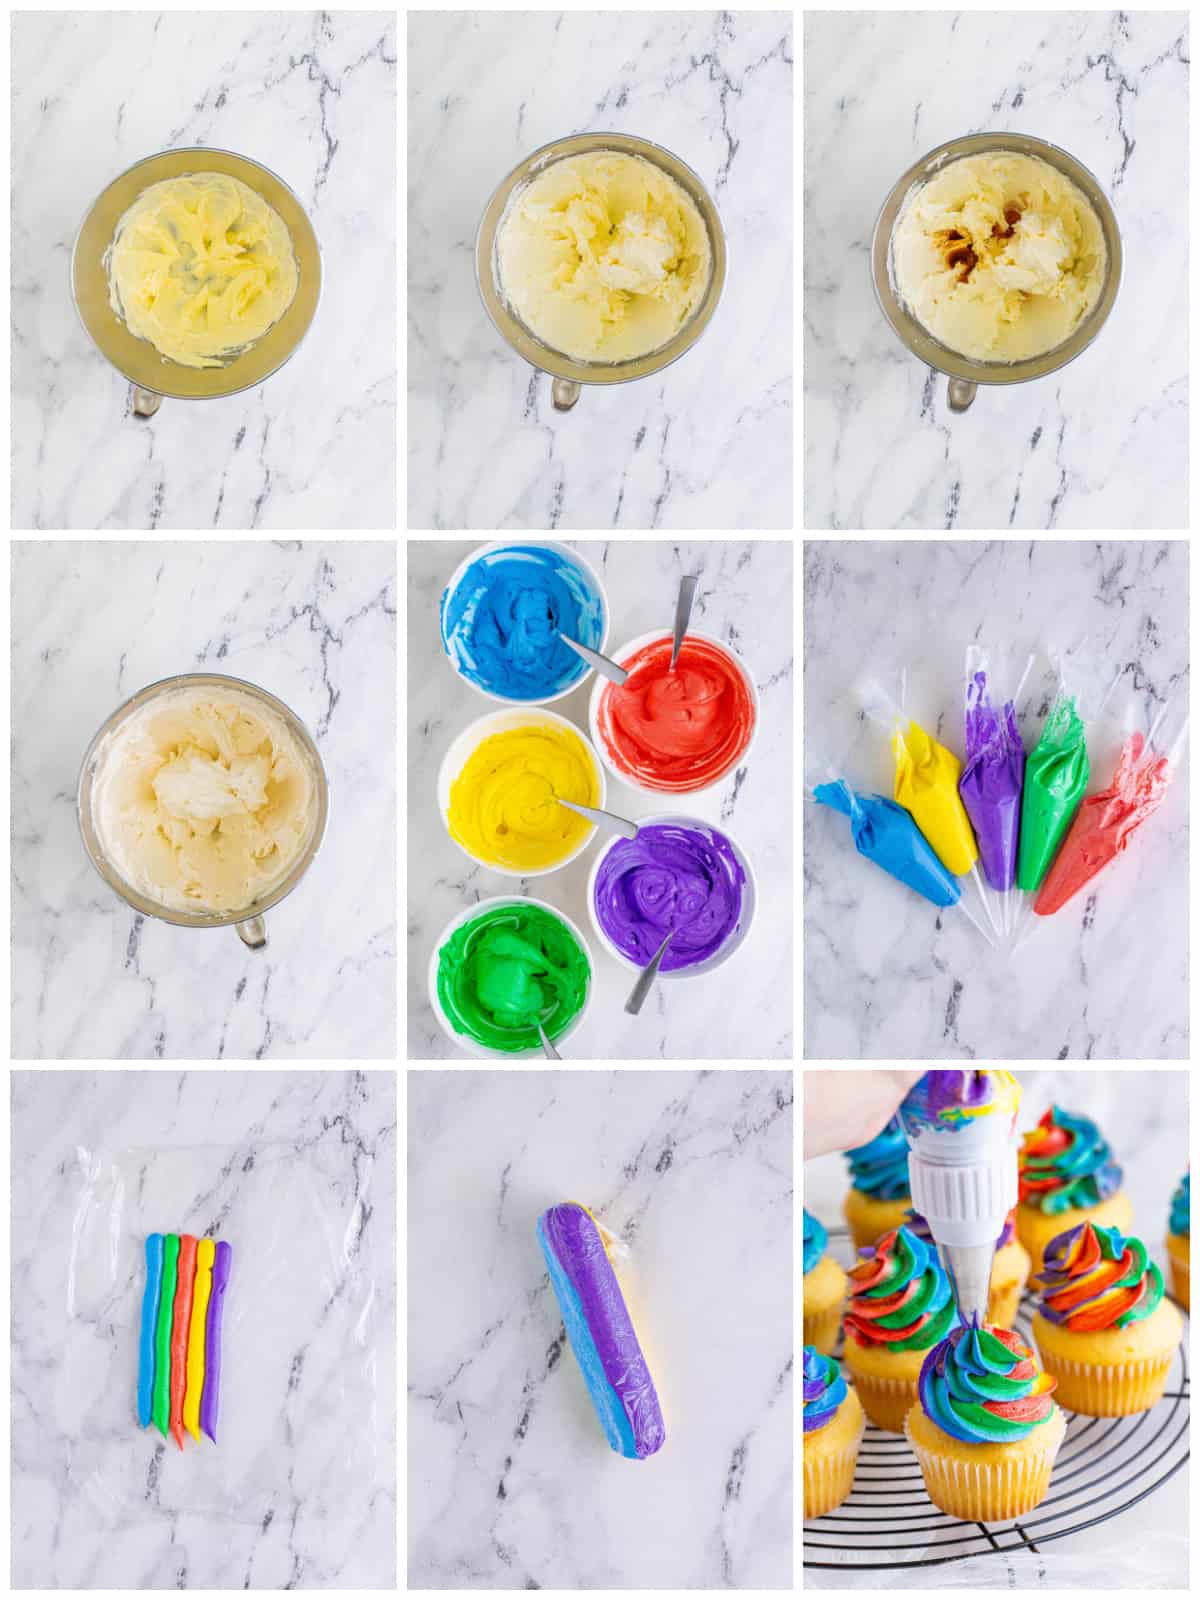 Step by step photos on how to make Rainbow Frosting.